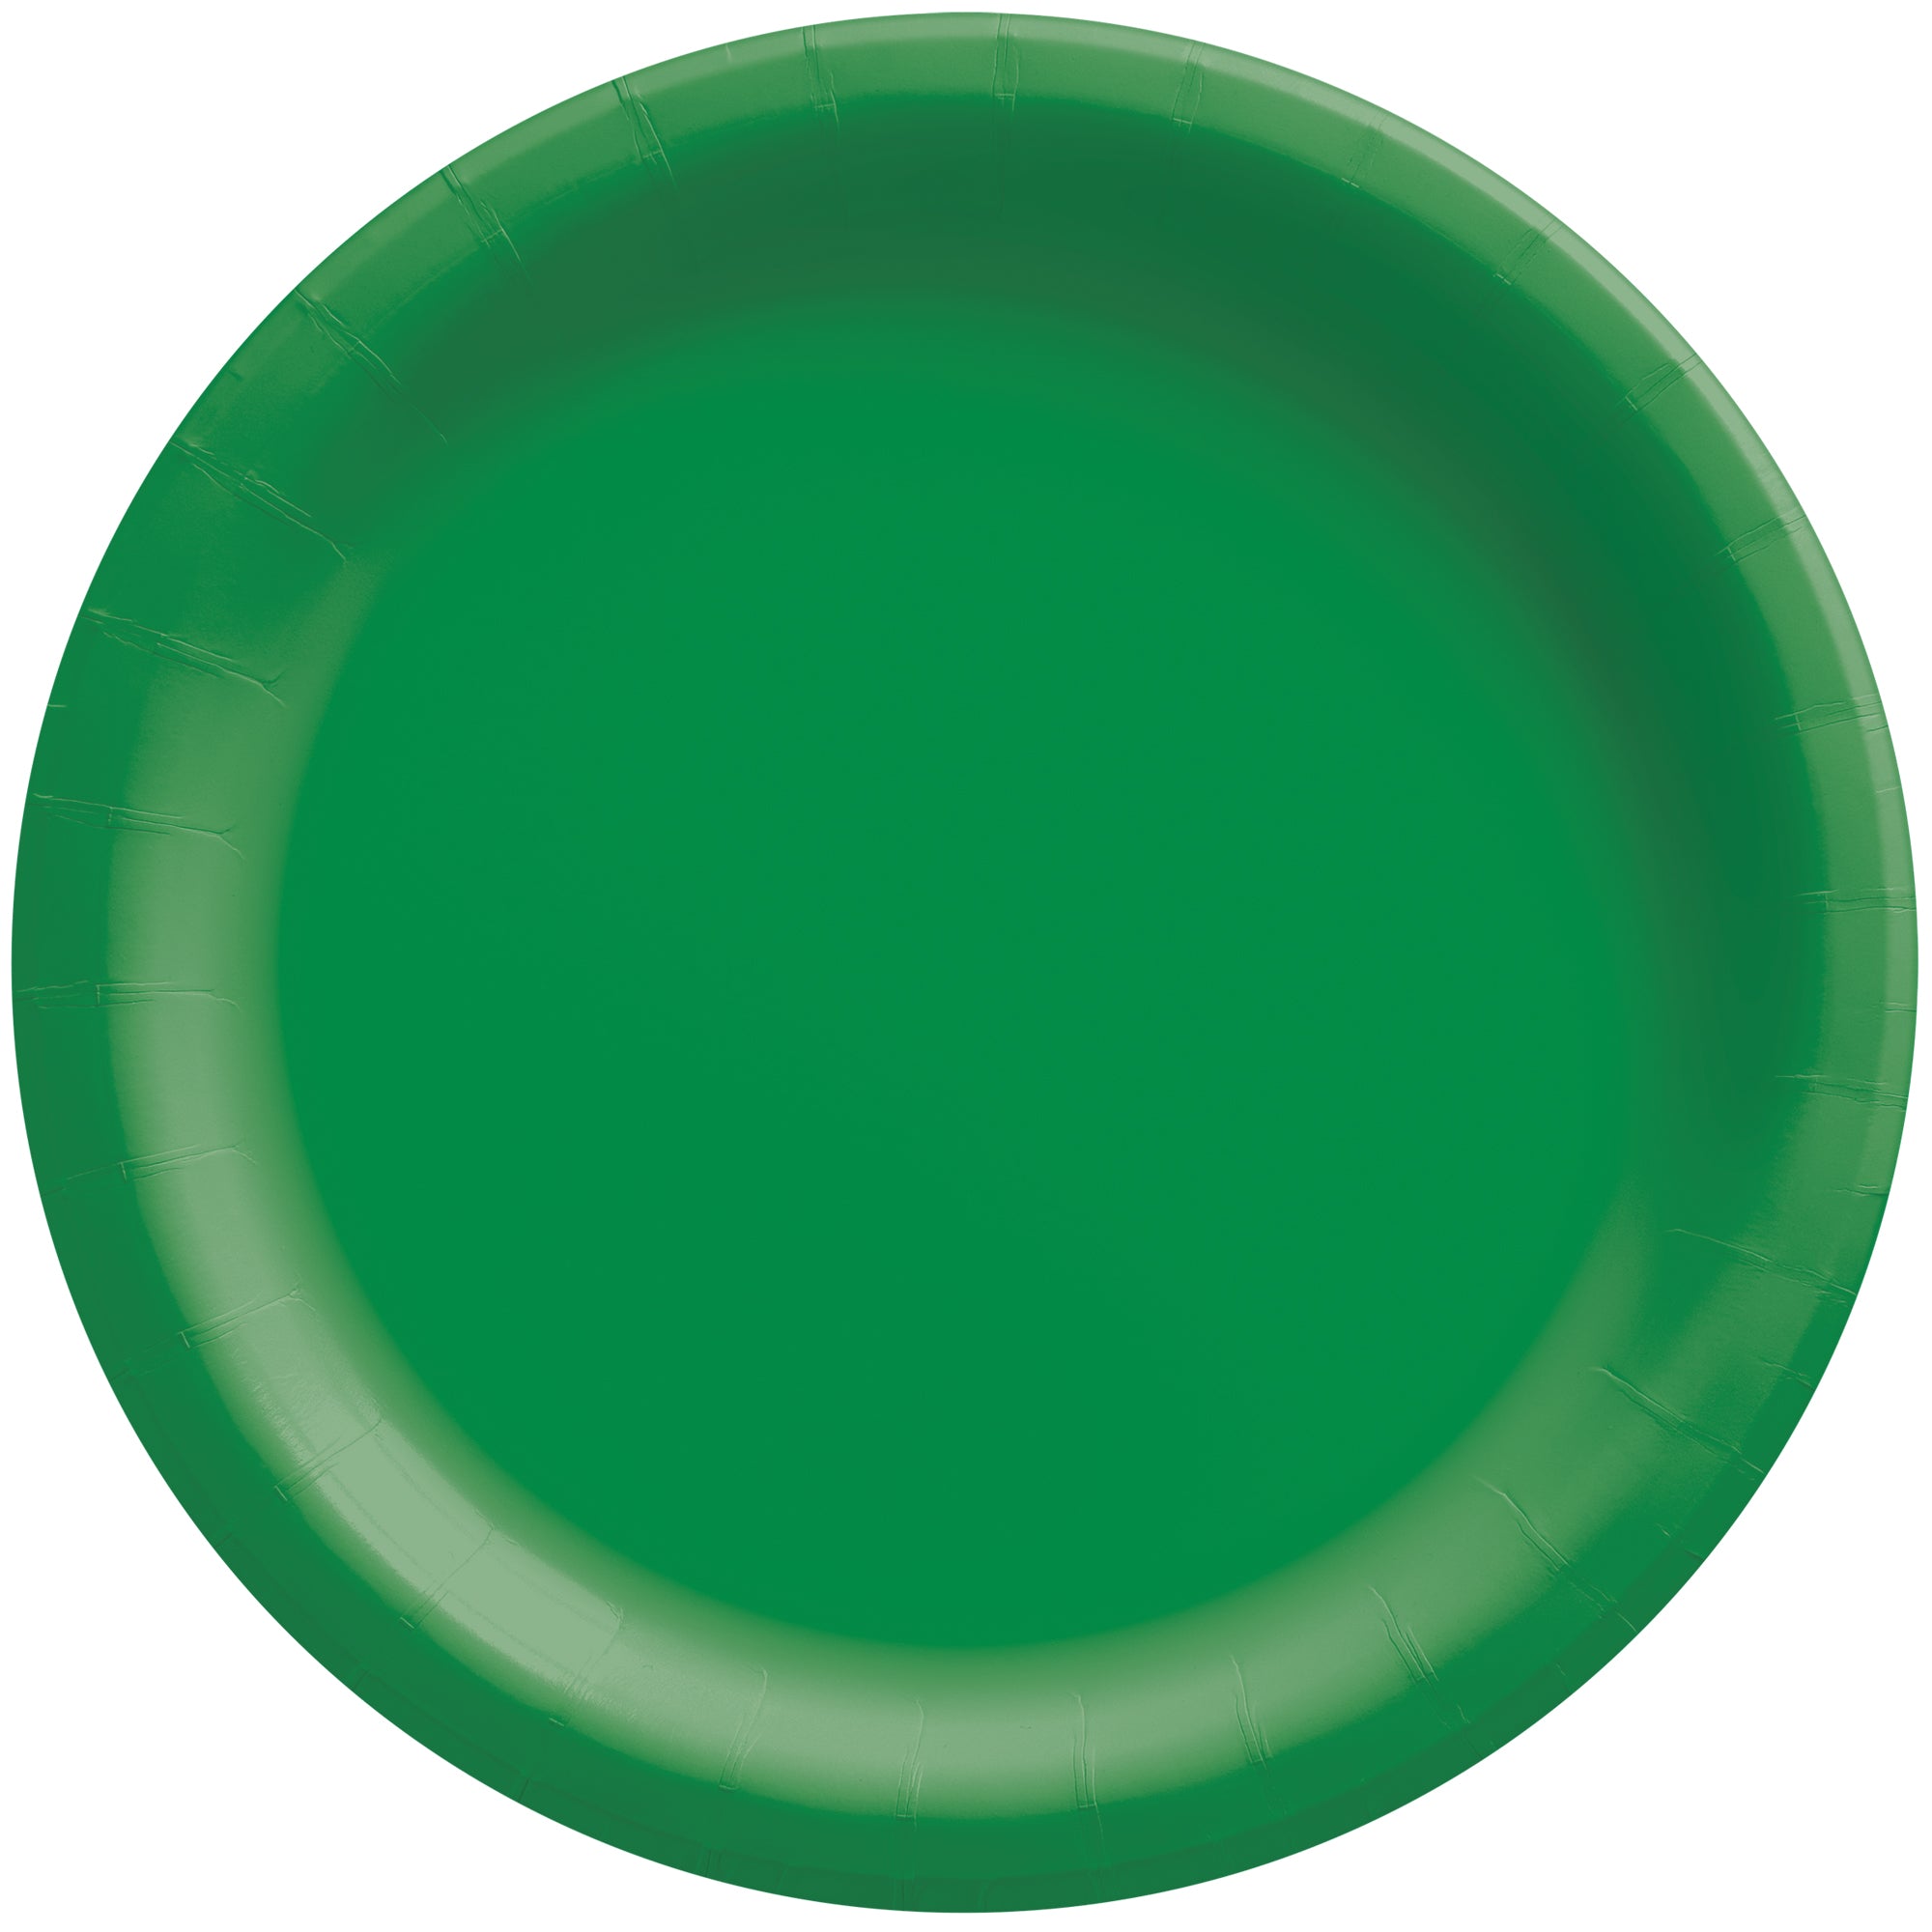 Festive Green 6 3/4" Round Paper Plates, 20 count